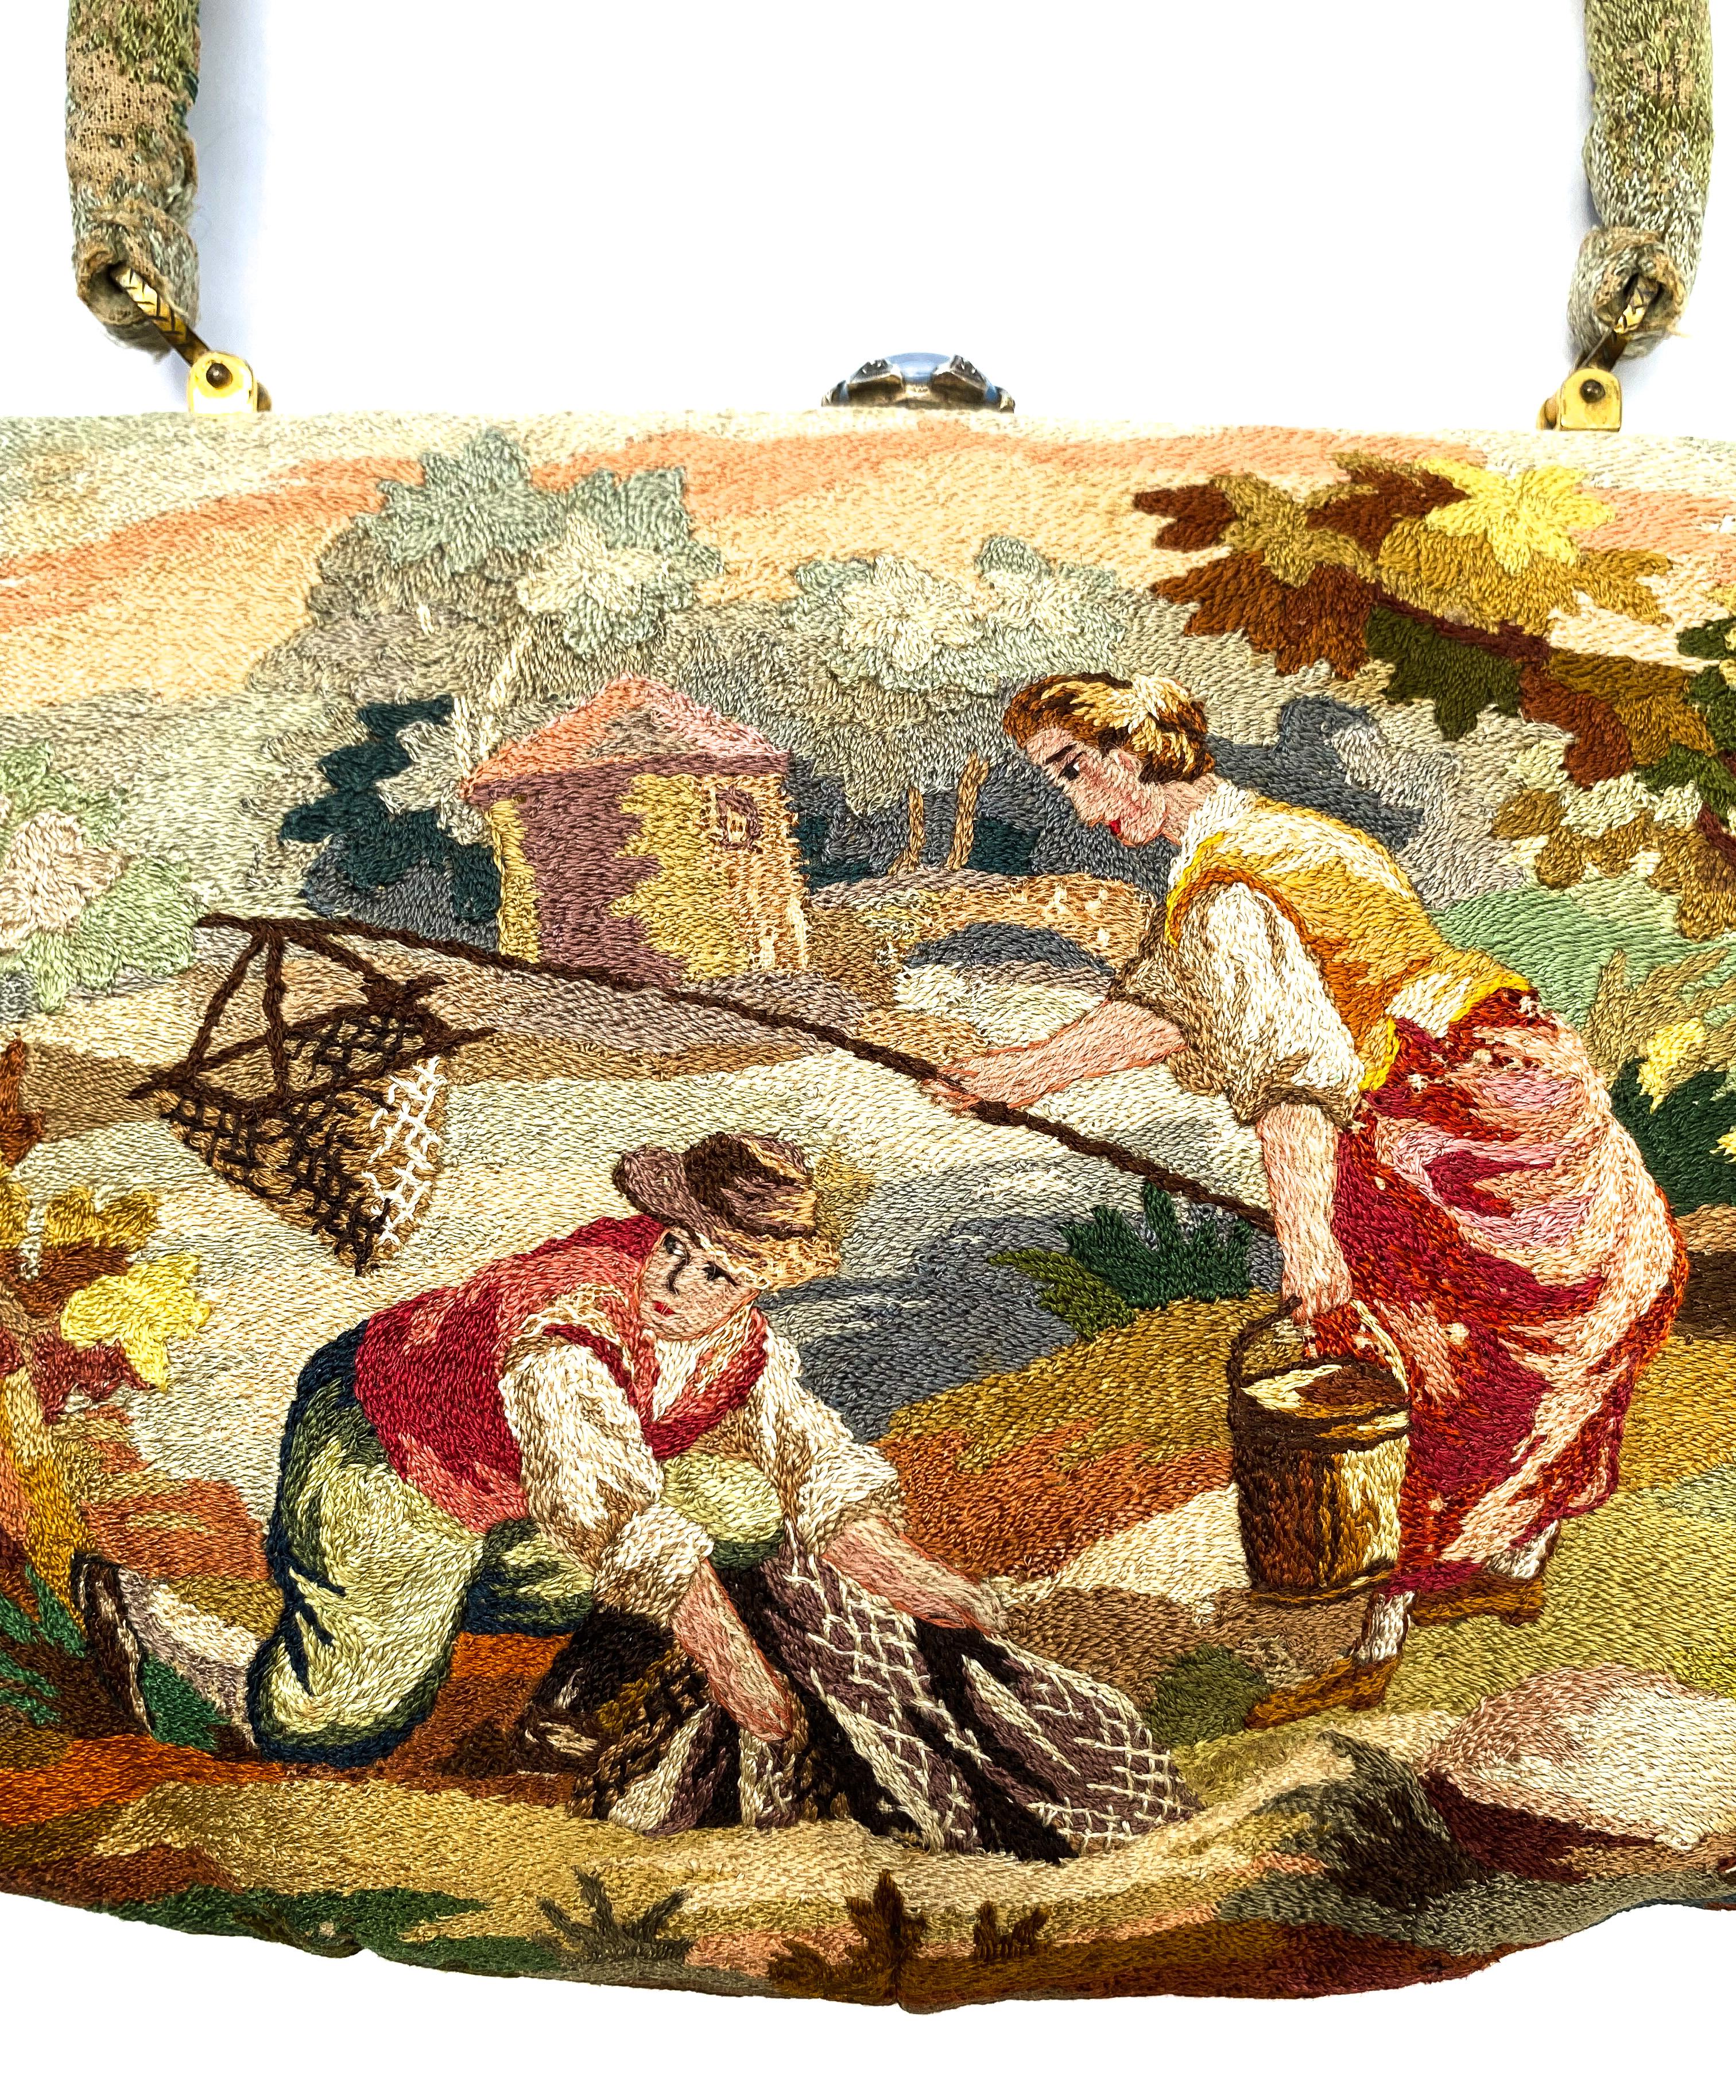 A beautifully hand stitched and sewn handbag with a charming antique rustic scene with two figures by master craftsmen and luxury good manufacturer Morabito. executed in silk, in fine and varied stitching, some in slight relief, and some in delicate